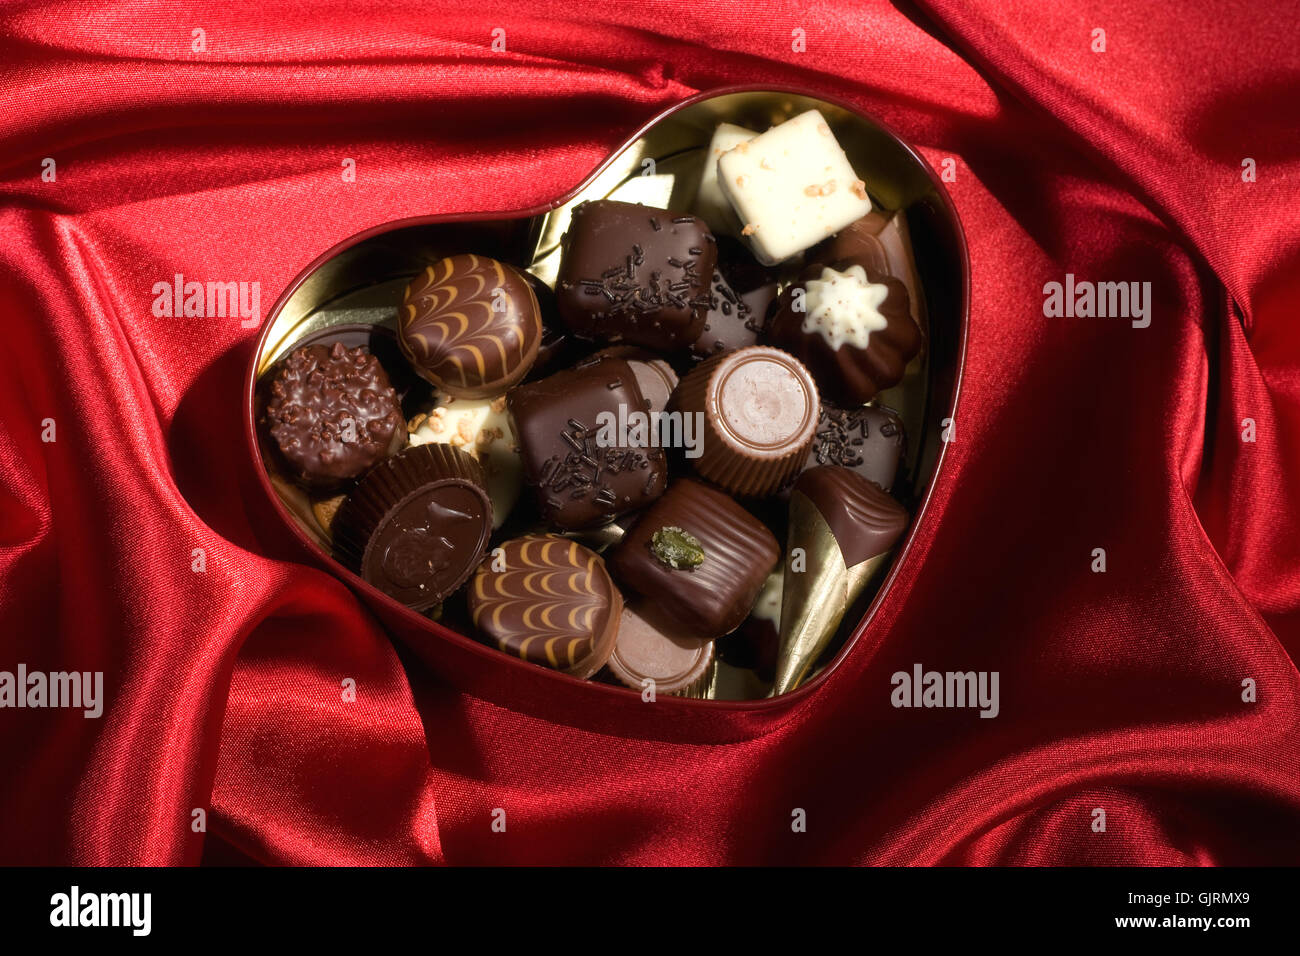 sweet gift candy Stock Photo